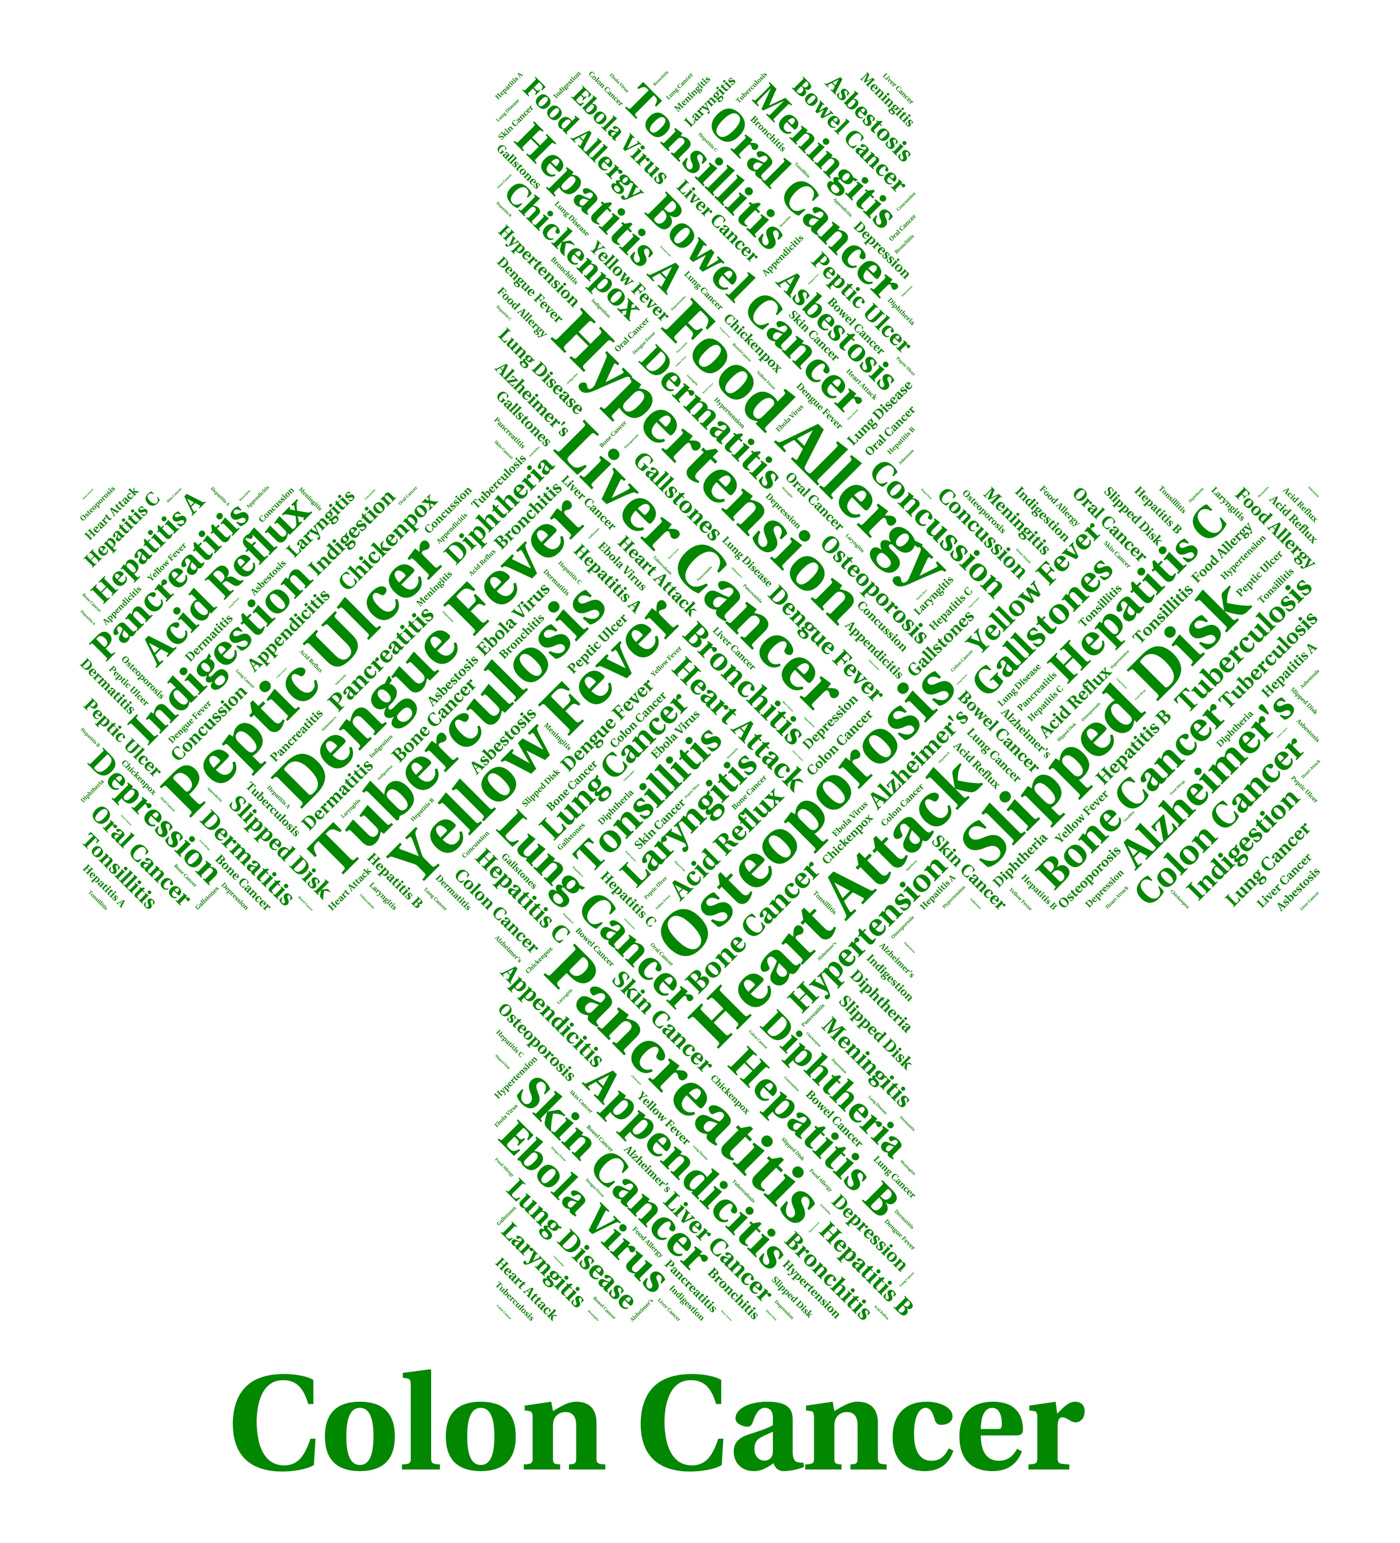 Colon cancer represents ill health and afflictions photo